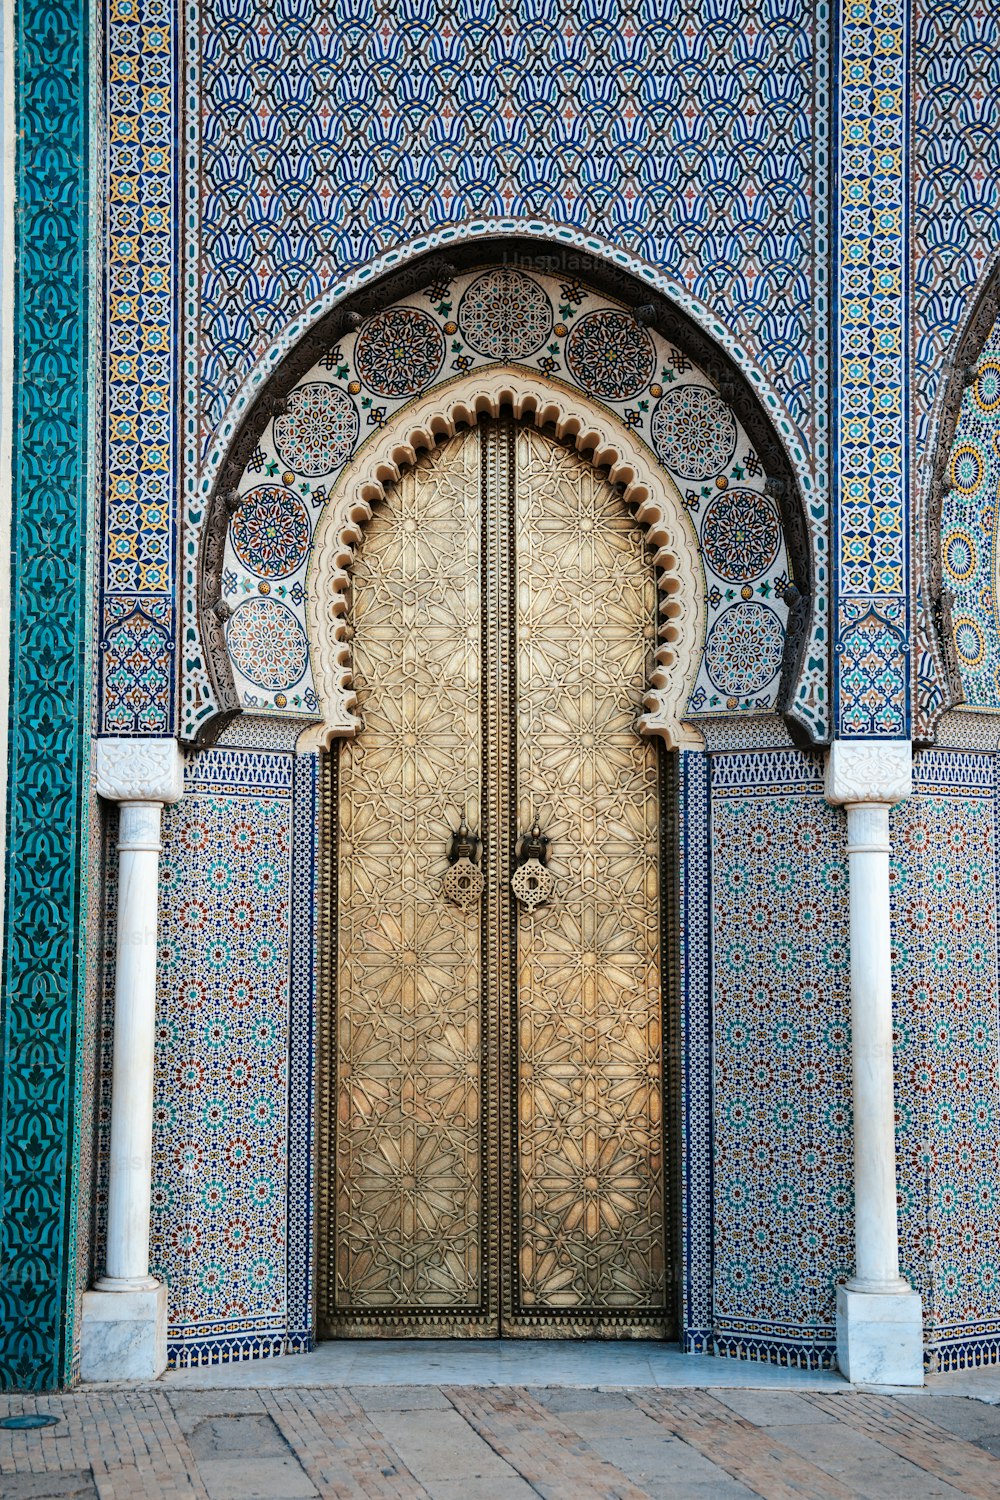 an ornate doorway with a wooden door in the middle